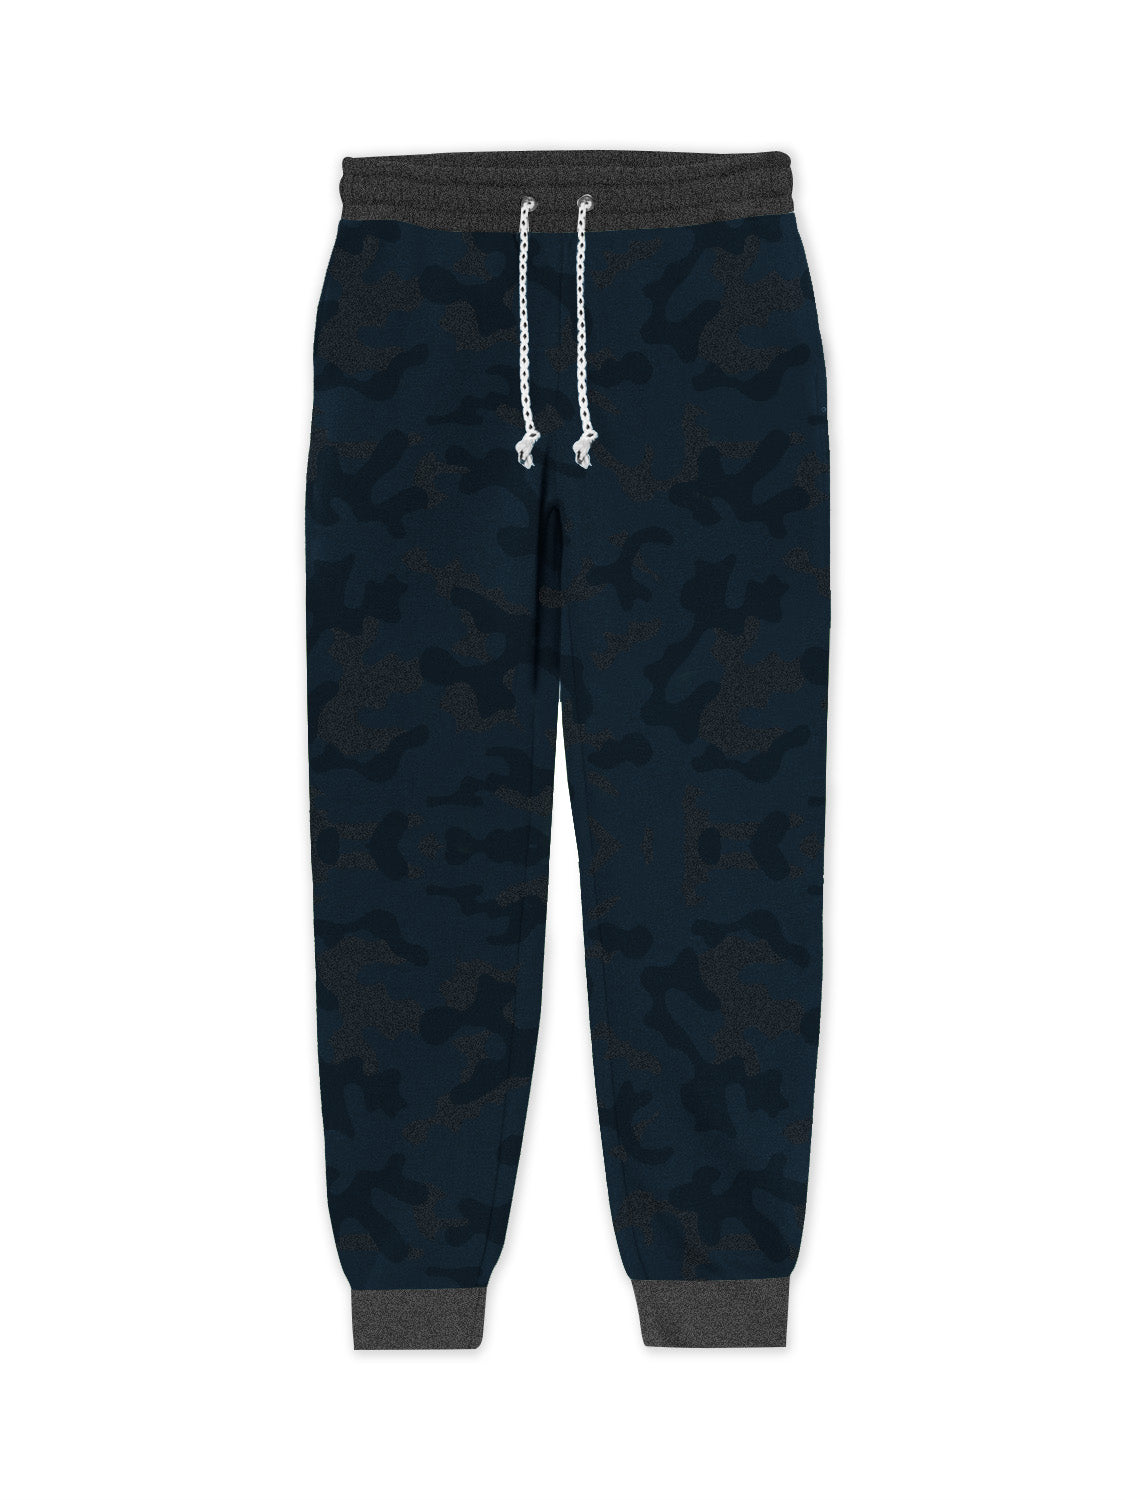 Mango Fleece Slim Fit Jogger Trouser For Kids-Dark Navy With Allover Camouflage-SP1249